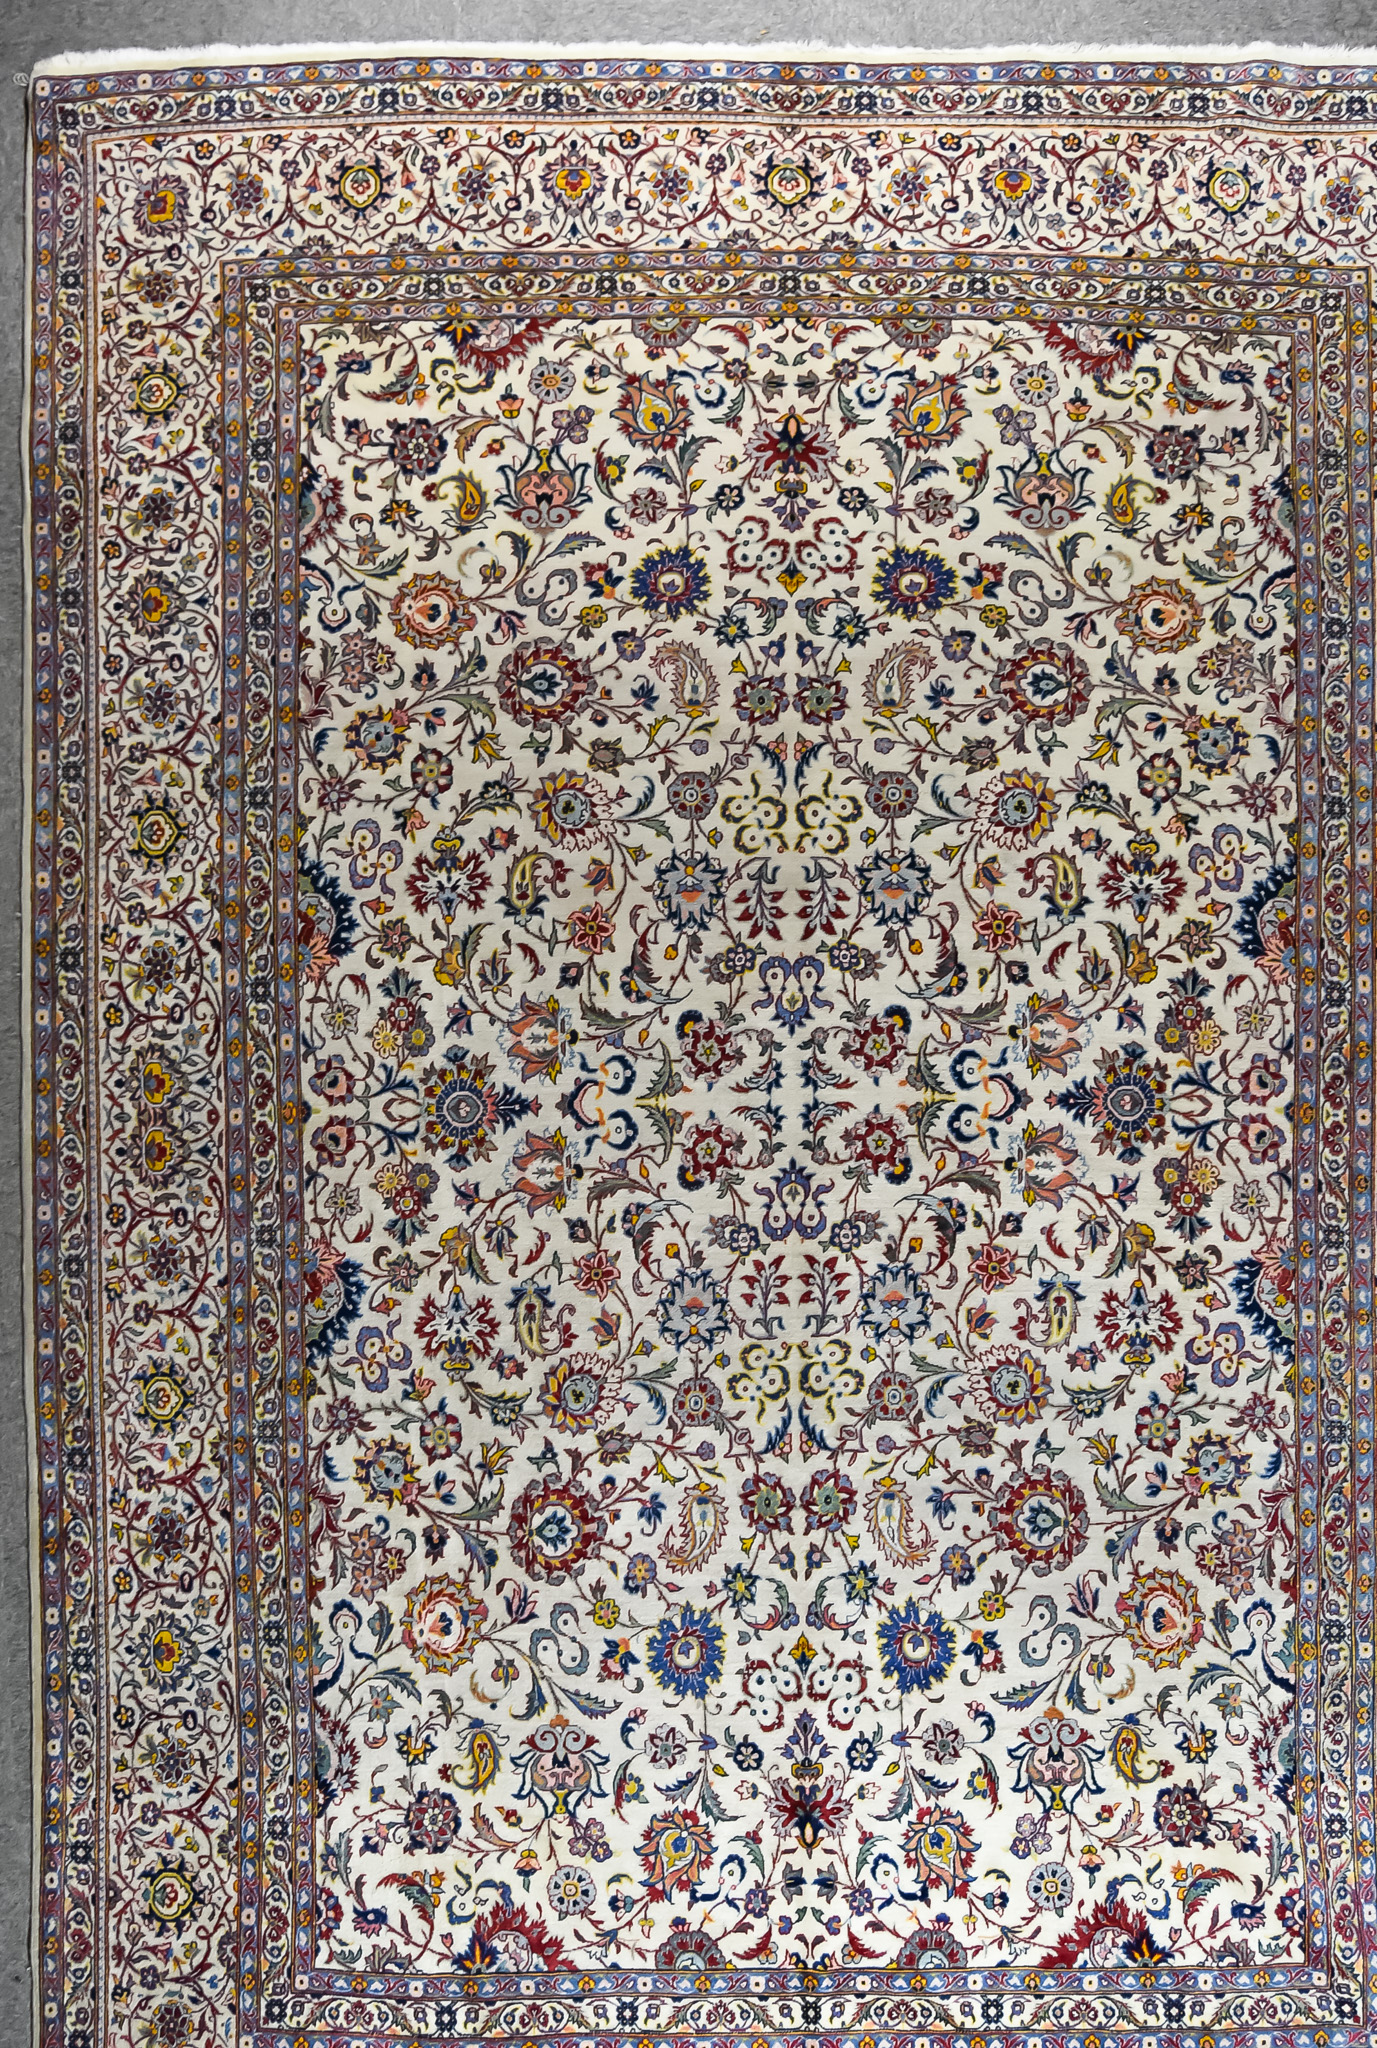 An Antique Kashan Carpet, woven in colours of ivory, navy blue and wine, the field filled with